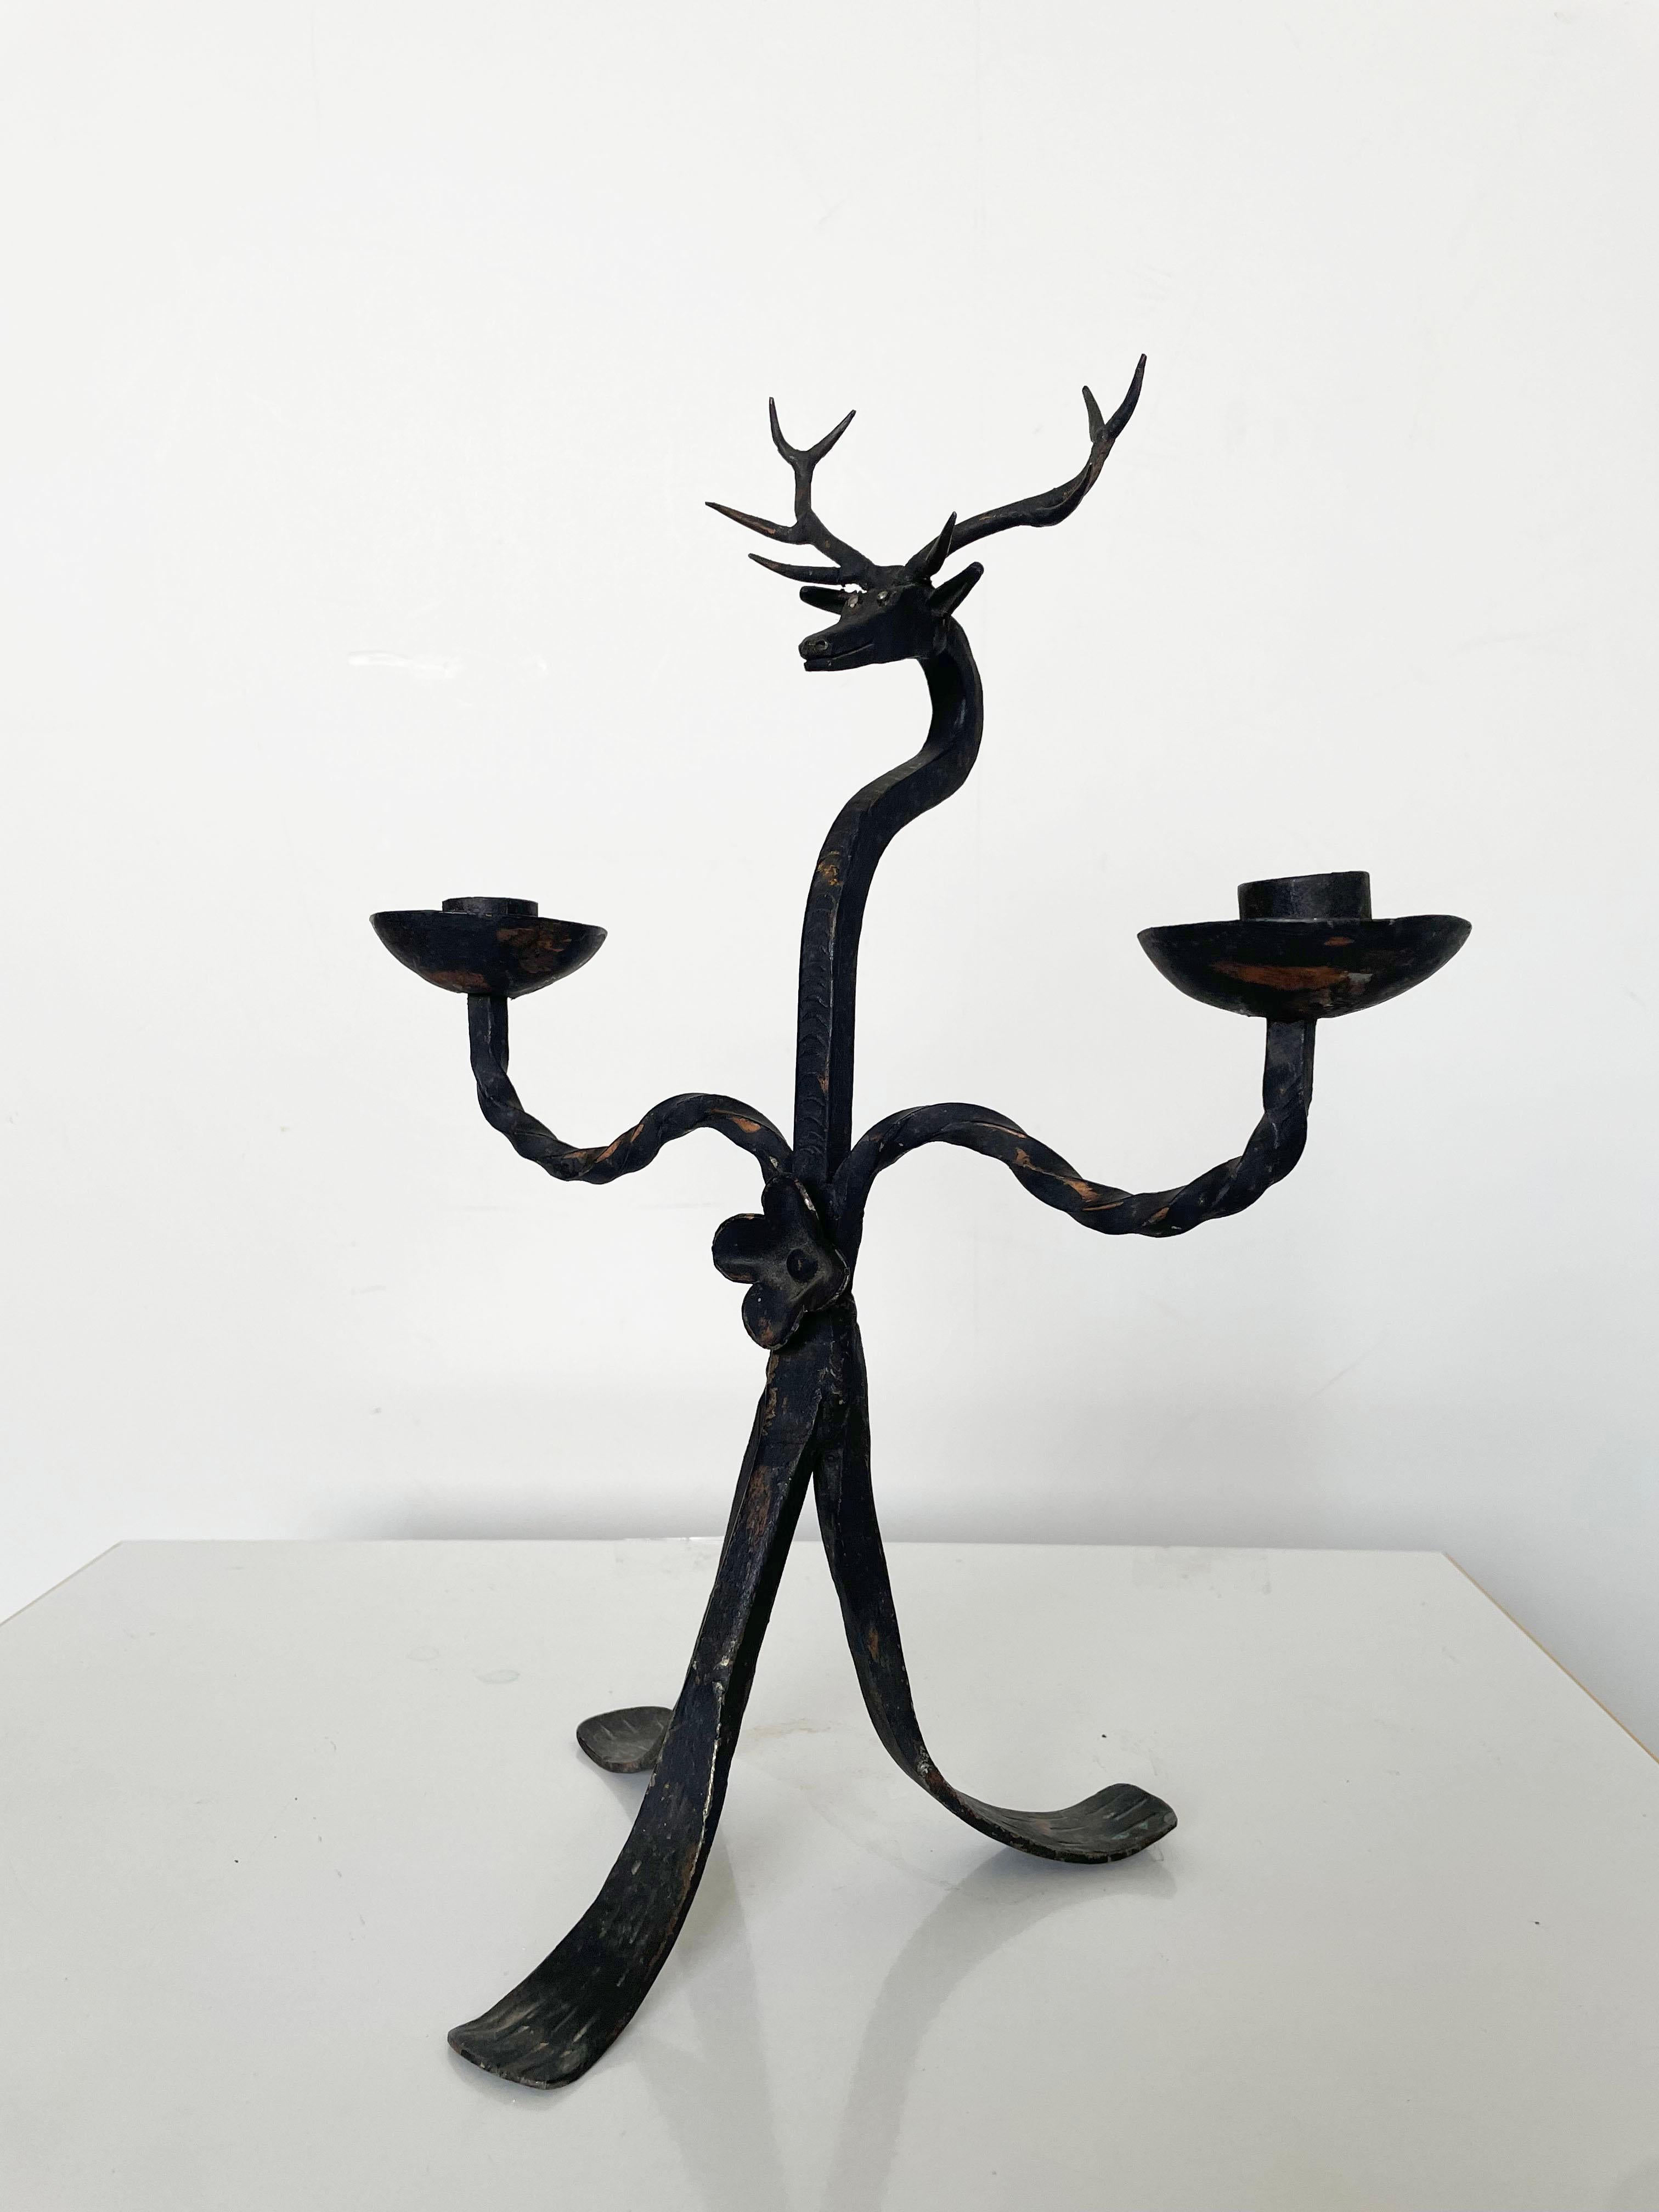 Brutalist Style Wrought Iron Deer Shaped Candlestick Candelabra, 1940s / 1950s For Sale 2